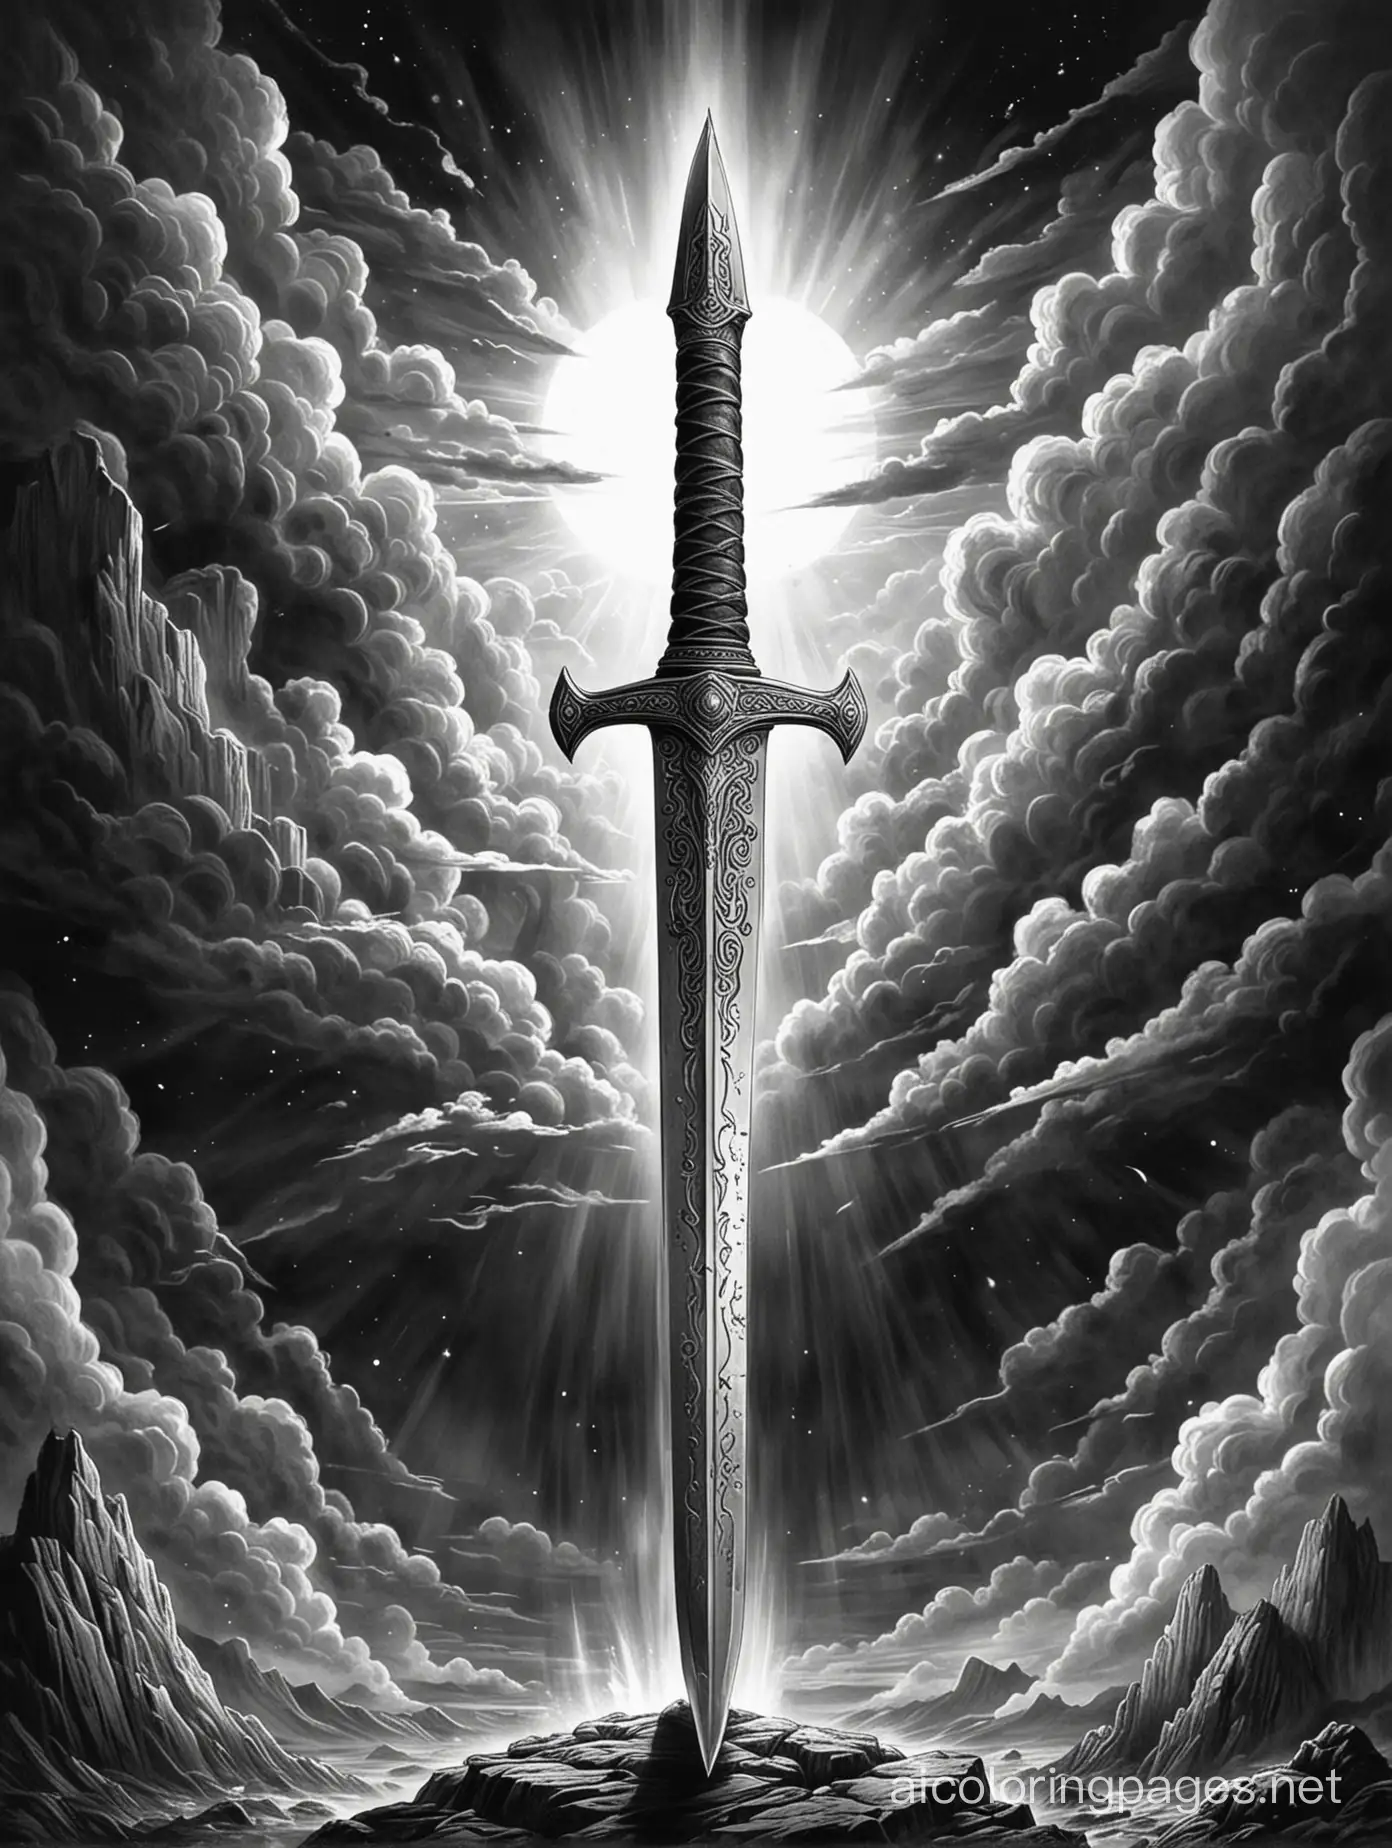 ((black and white illustration)) a sword ((the sharp point of the sword is pointing at the top of the page)) emitting bright light in all directions, in the middle of a gloomy dark sky,  ((darkness is fleeing from the sword)), Coloring Page, black and white, line art, white background, Simplicity, Ample White Space. The background of the coloring page is plain white to make it easy for young children to color within the lines. The outlines of all the subjects are easy to distinguish, making it simple for kids to color without too much difficulty